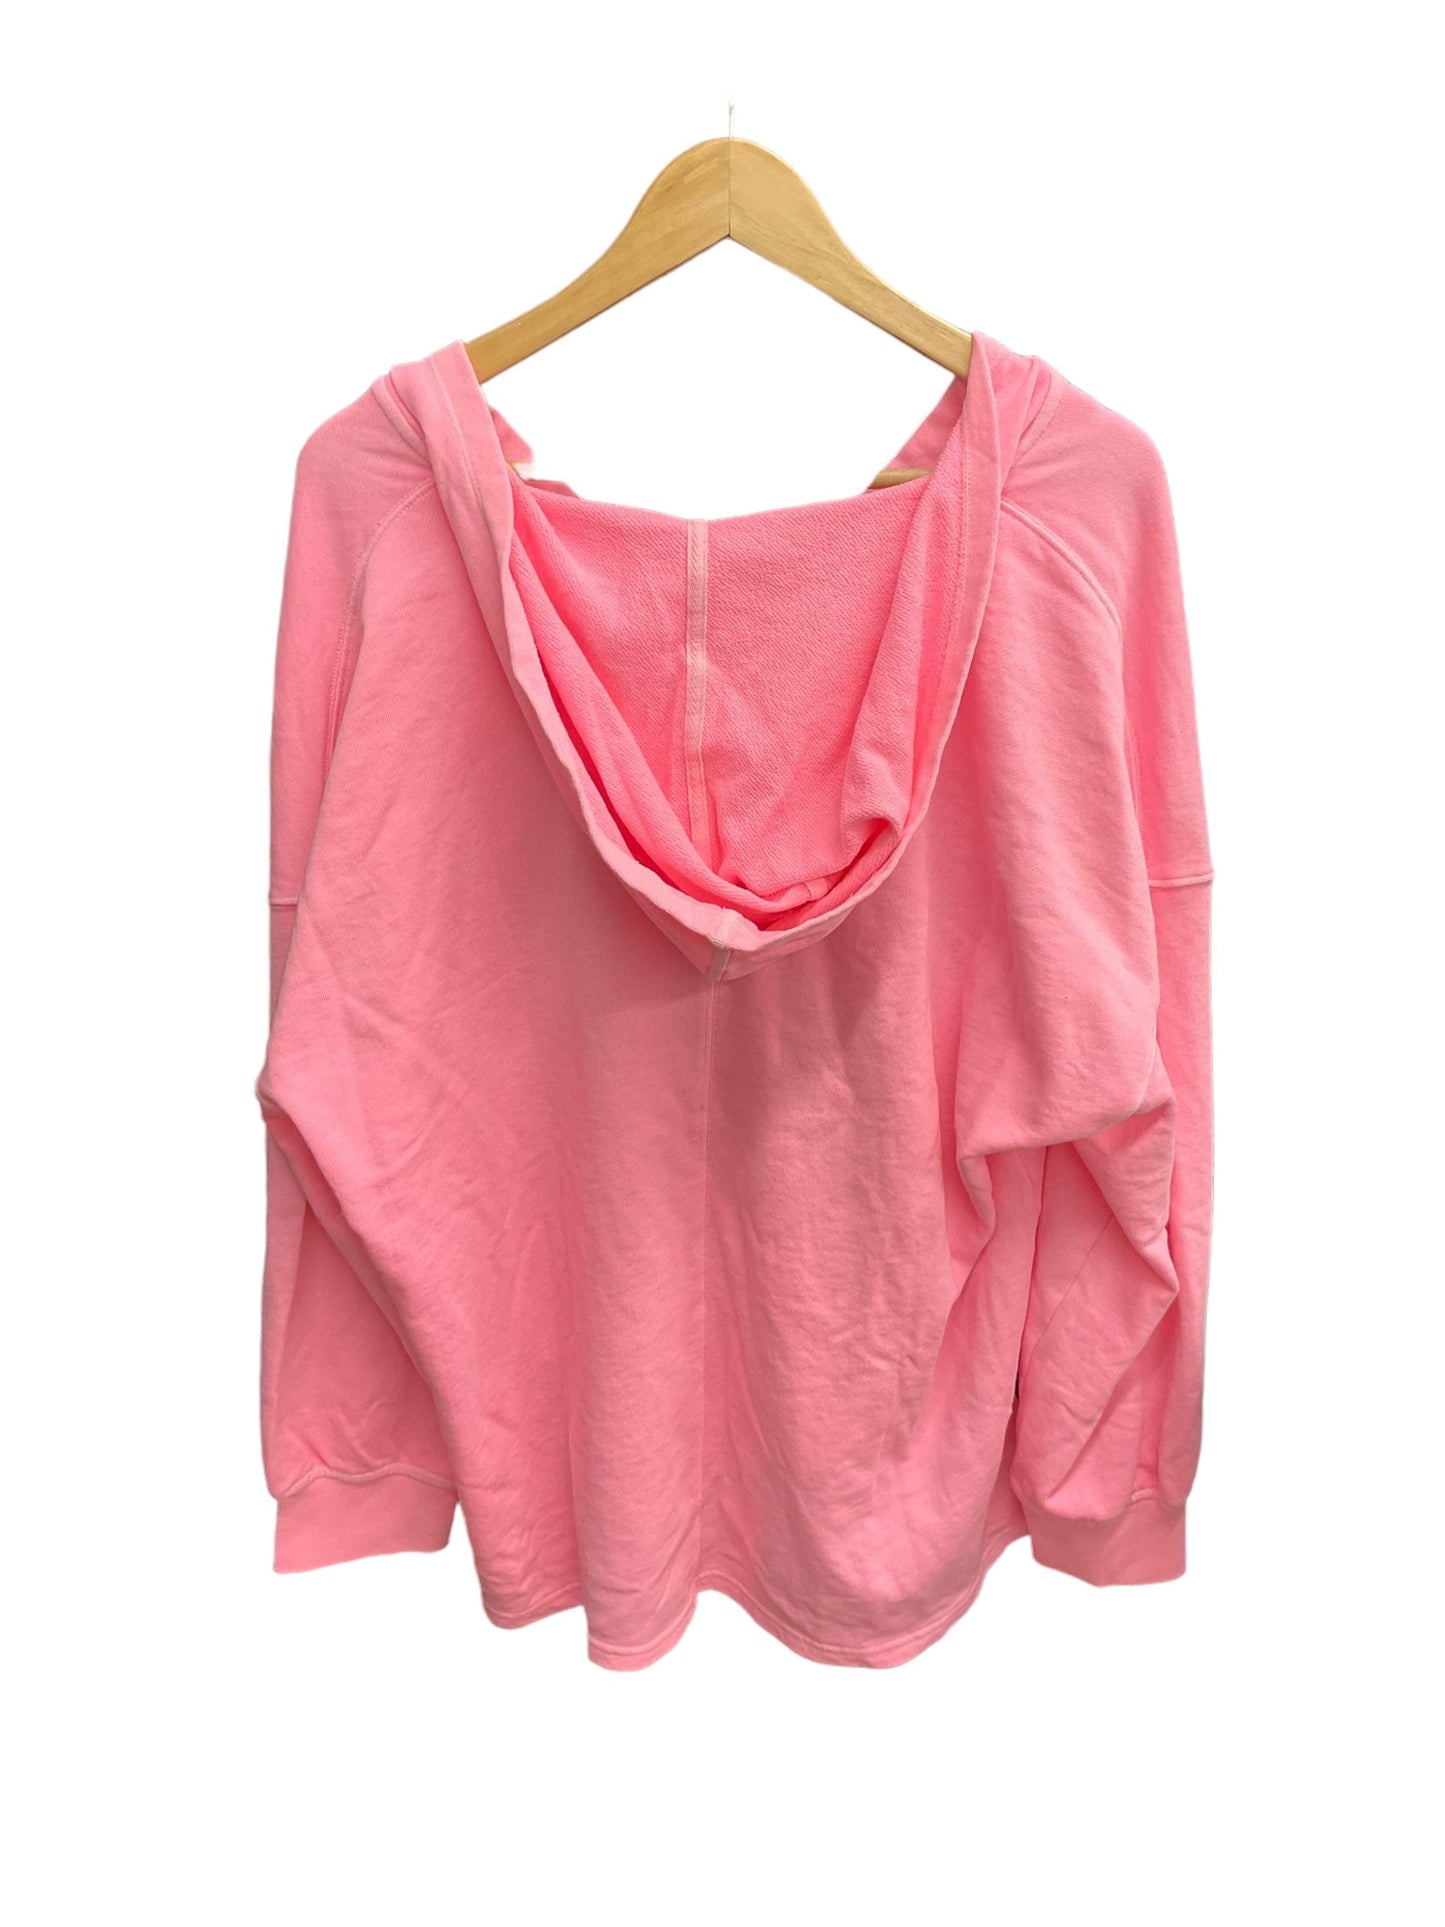 Pink Top Long Sleeve Old Navy, Size L